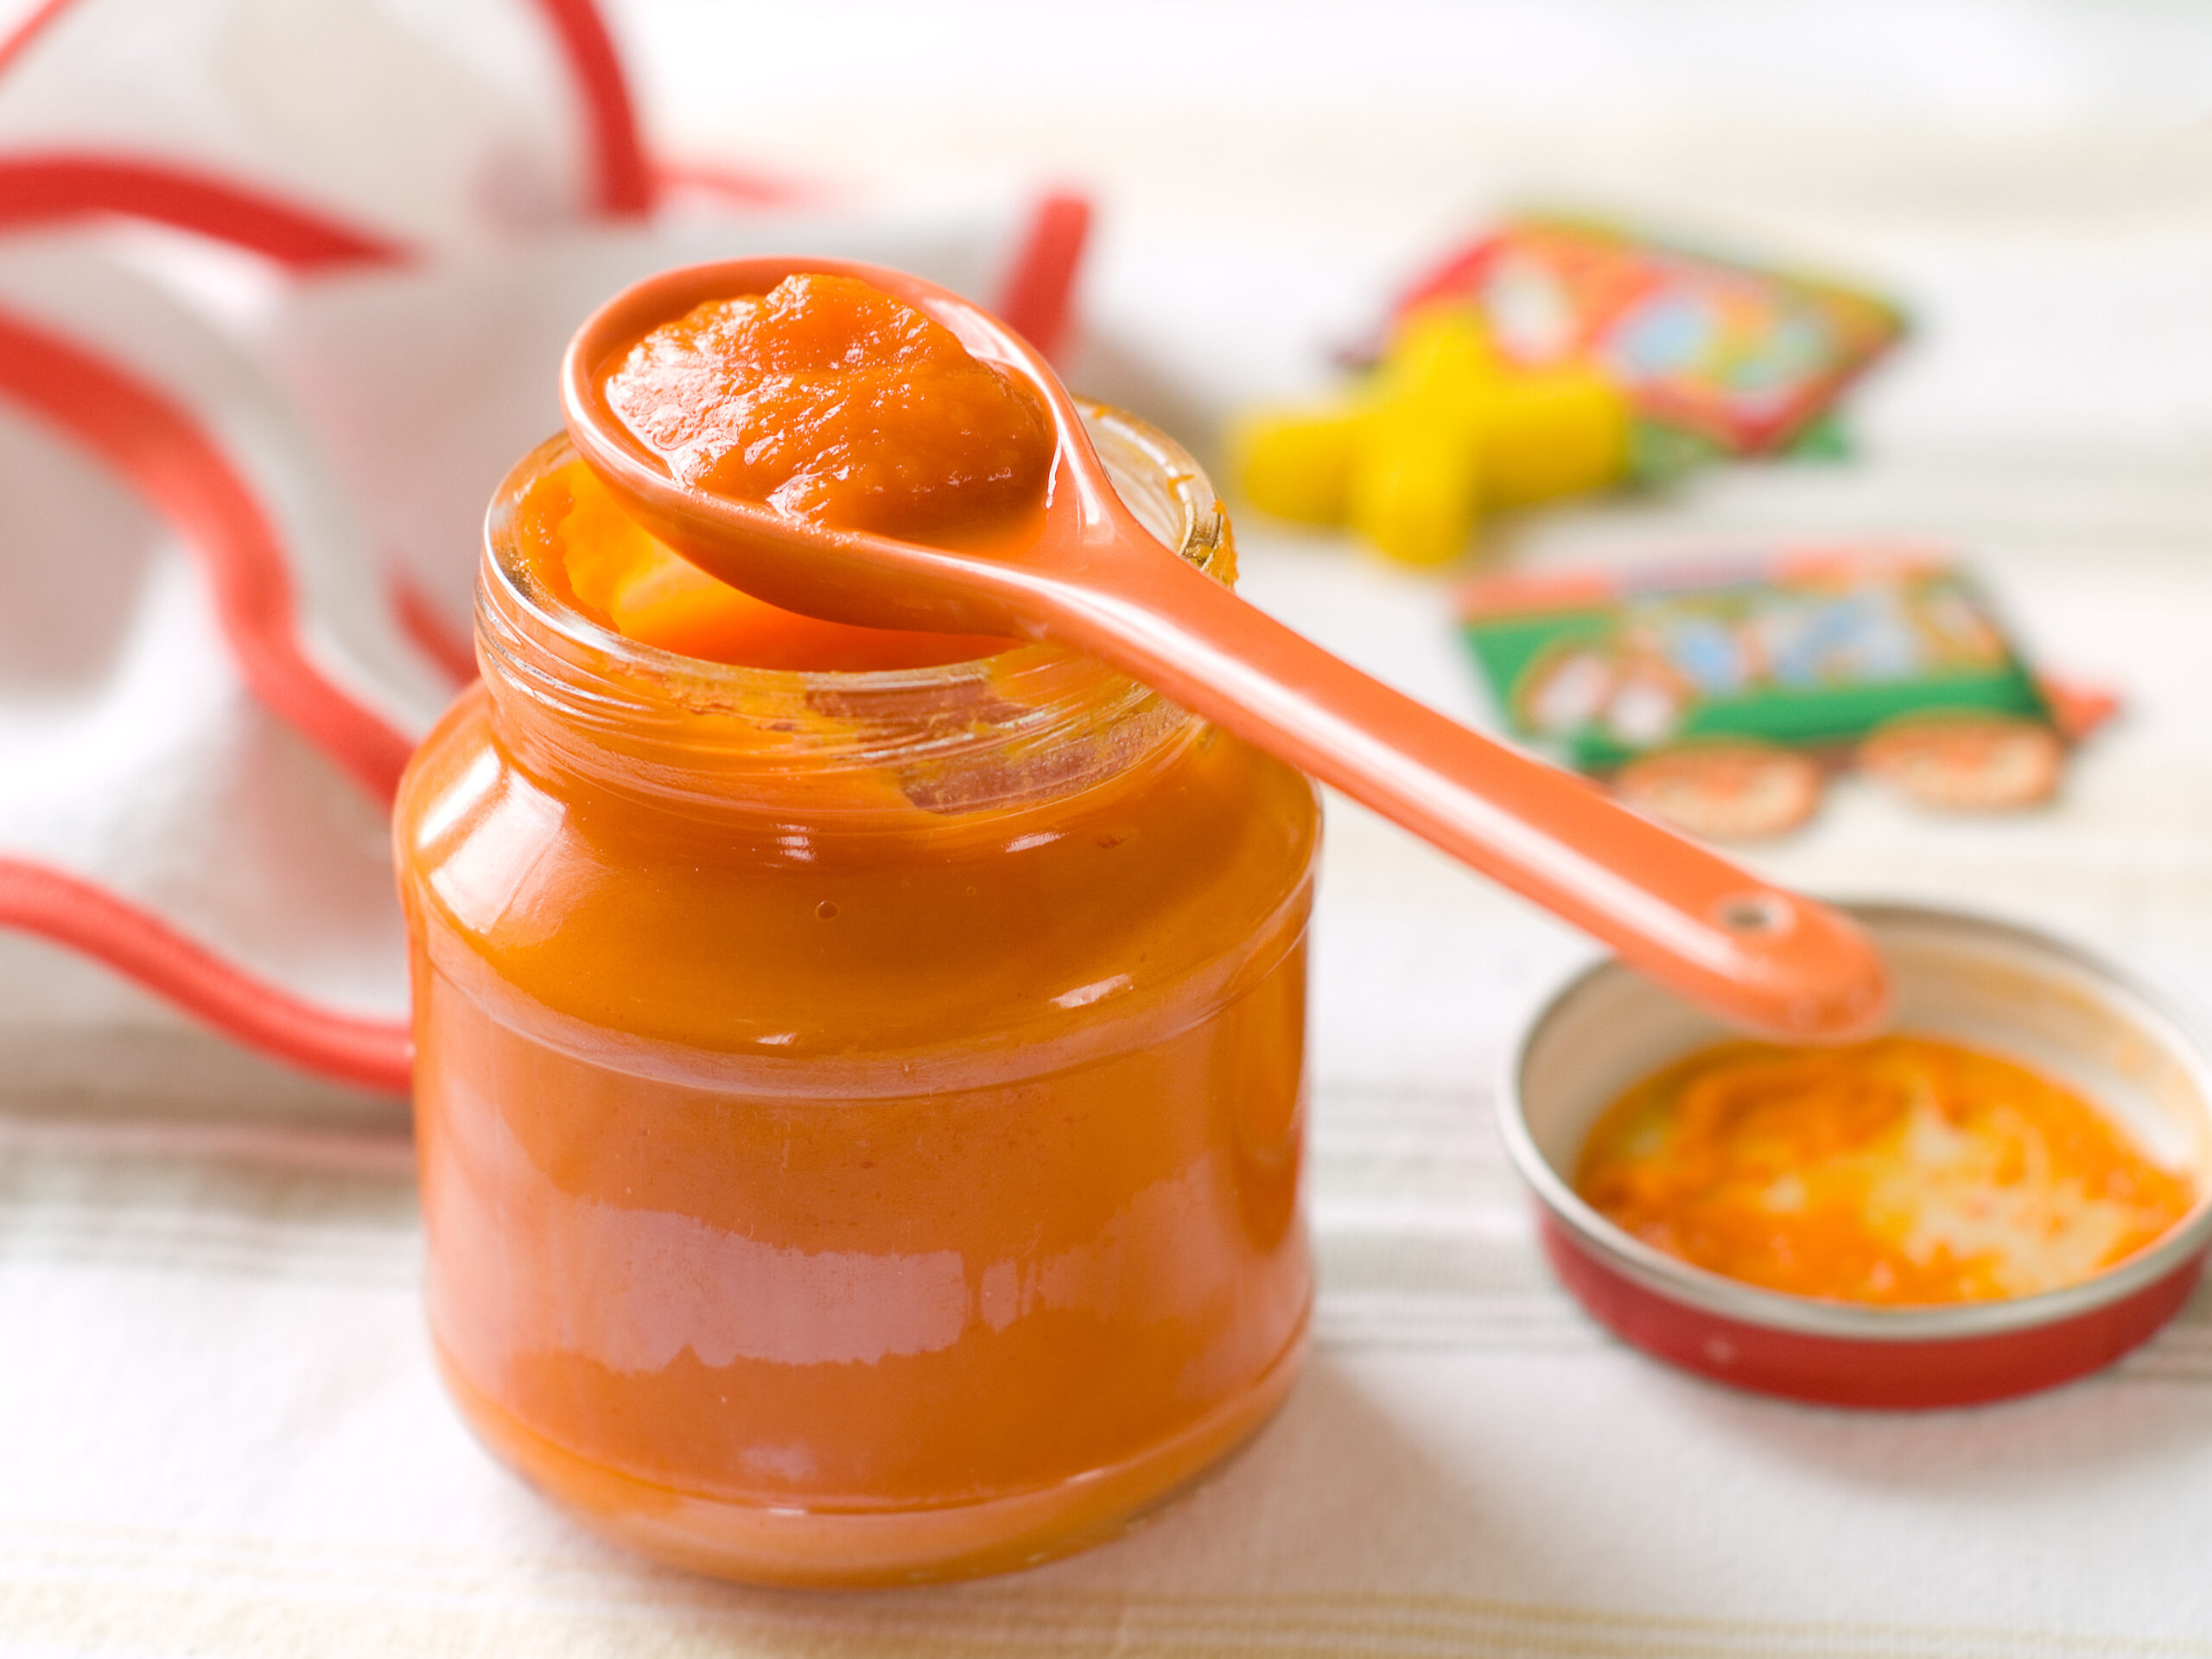 Baby food. A jar of orange pureed baby food with a spoon resting on its lip.